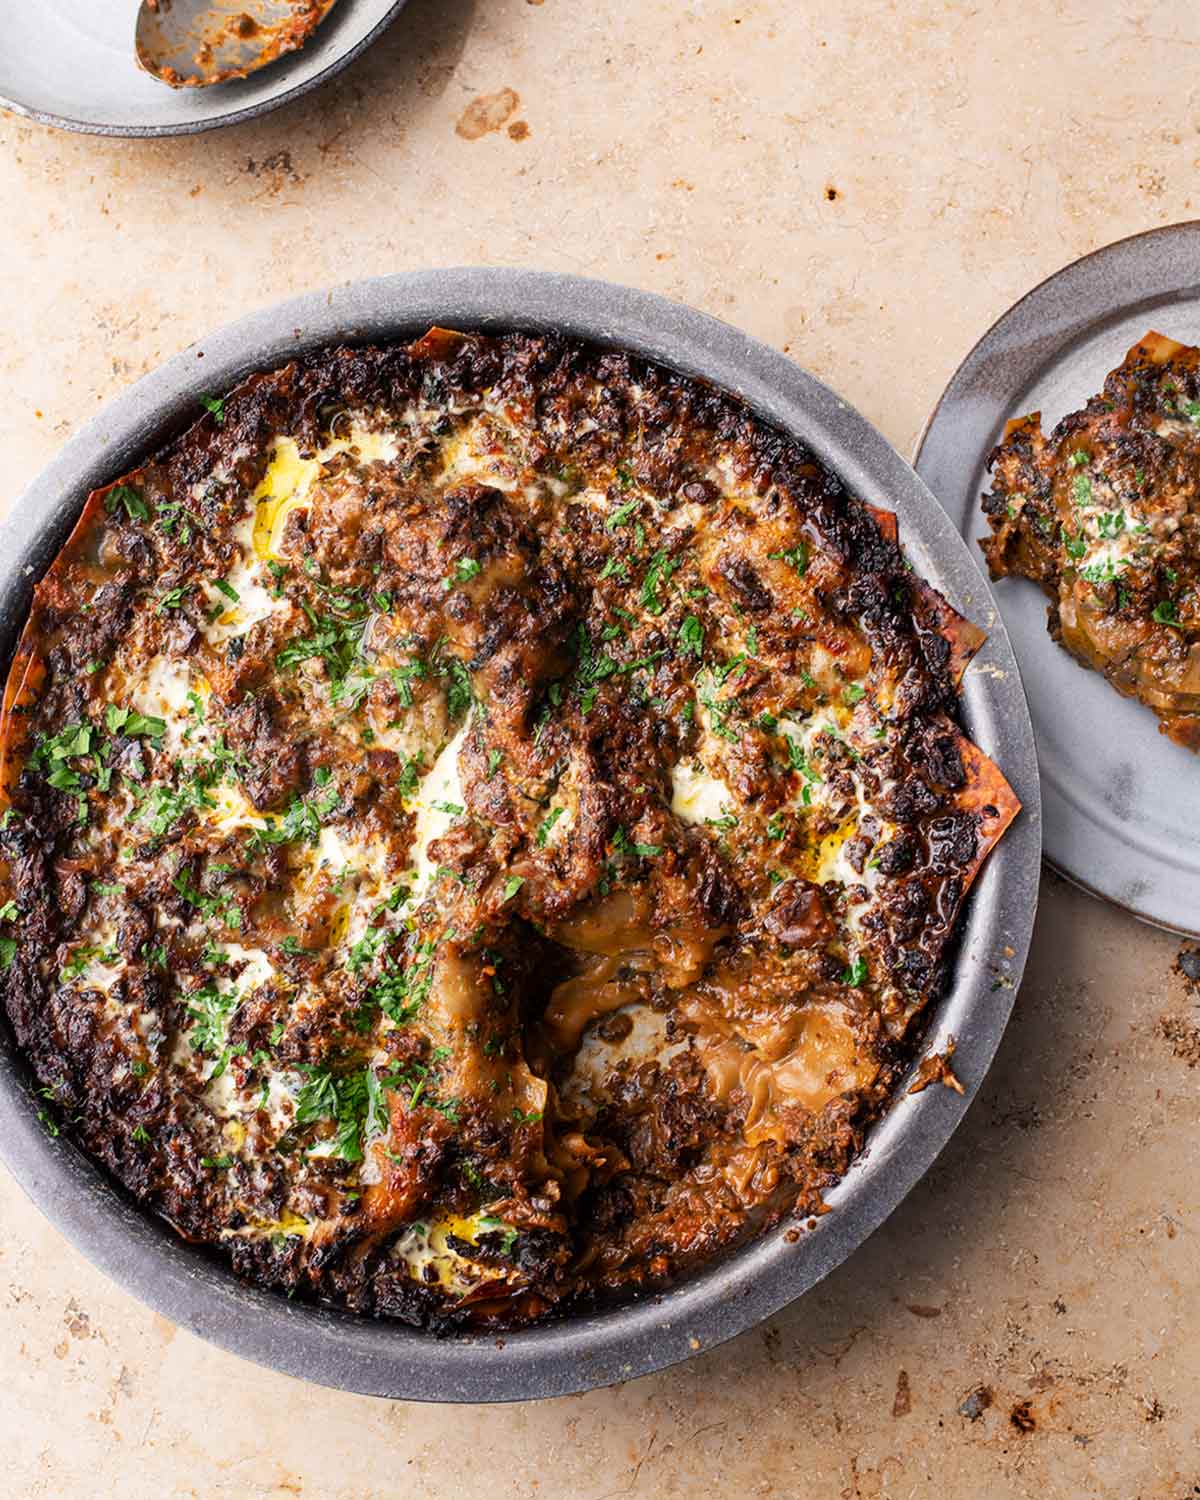 A round dish filled with spicy mushroom lasagna and a serving on a plate beside it.